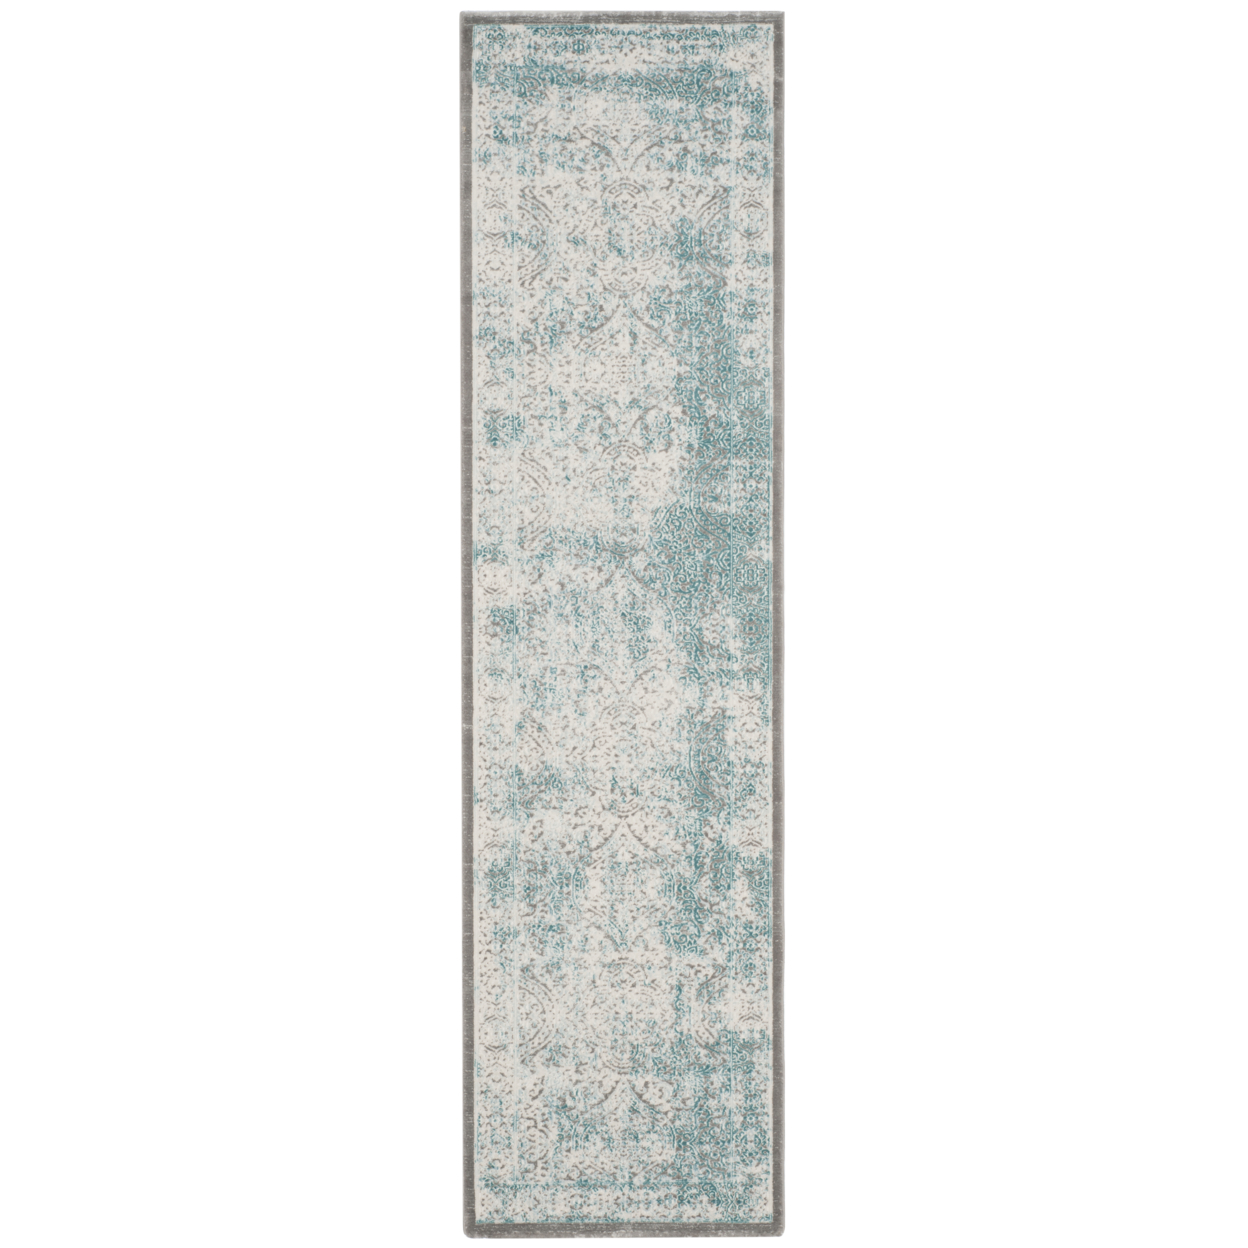 SAFAVIEH Passion Collection PAS401B Turquoise / Ivory Rug - 2' 2 X 12'